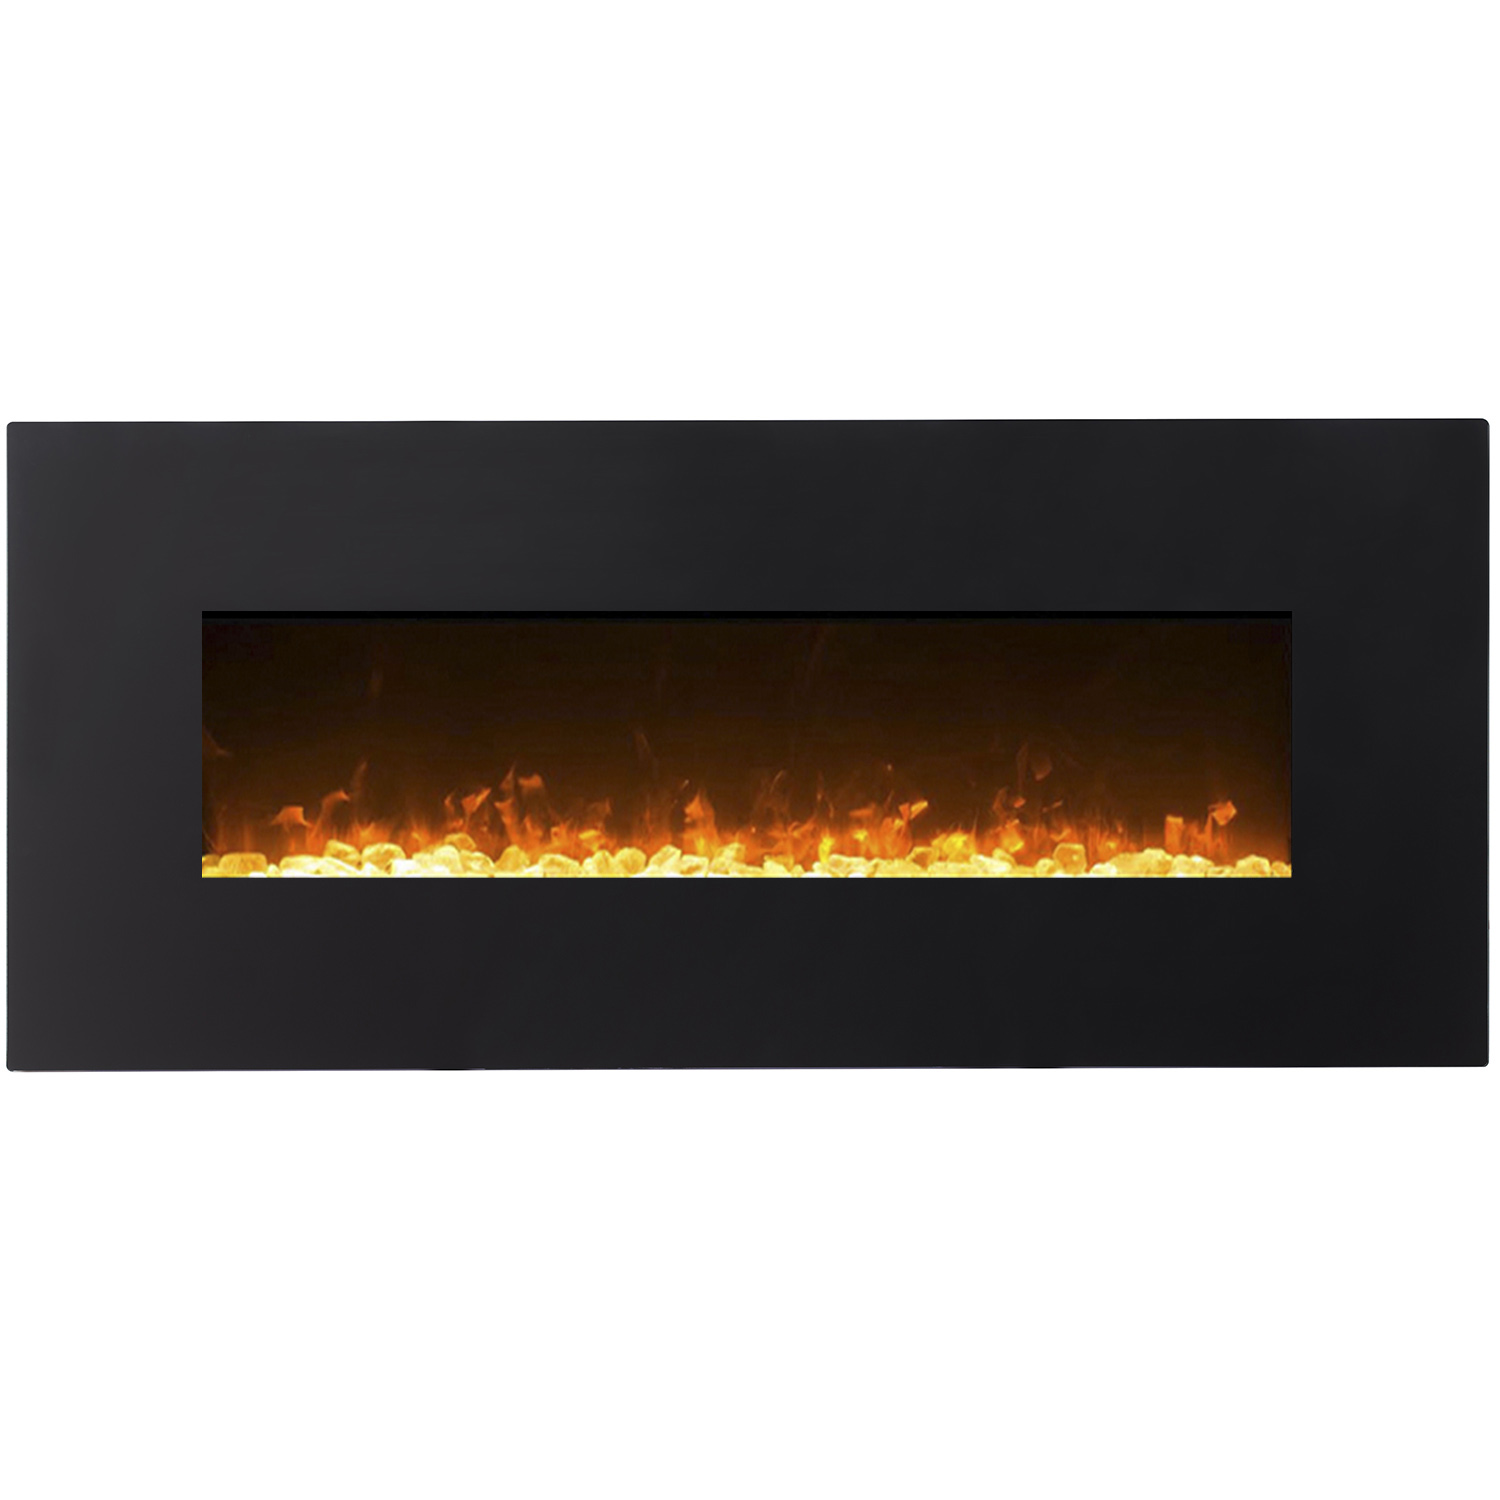 Regal Flame Erie Black 72" Pebble Ventless Heater Electric Wall Mounted Fireplace Better than Wood Fireplaces, Gas Logs, Firepla